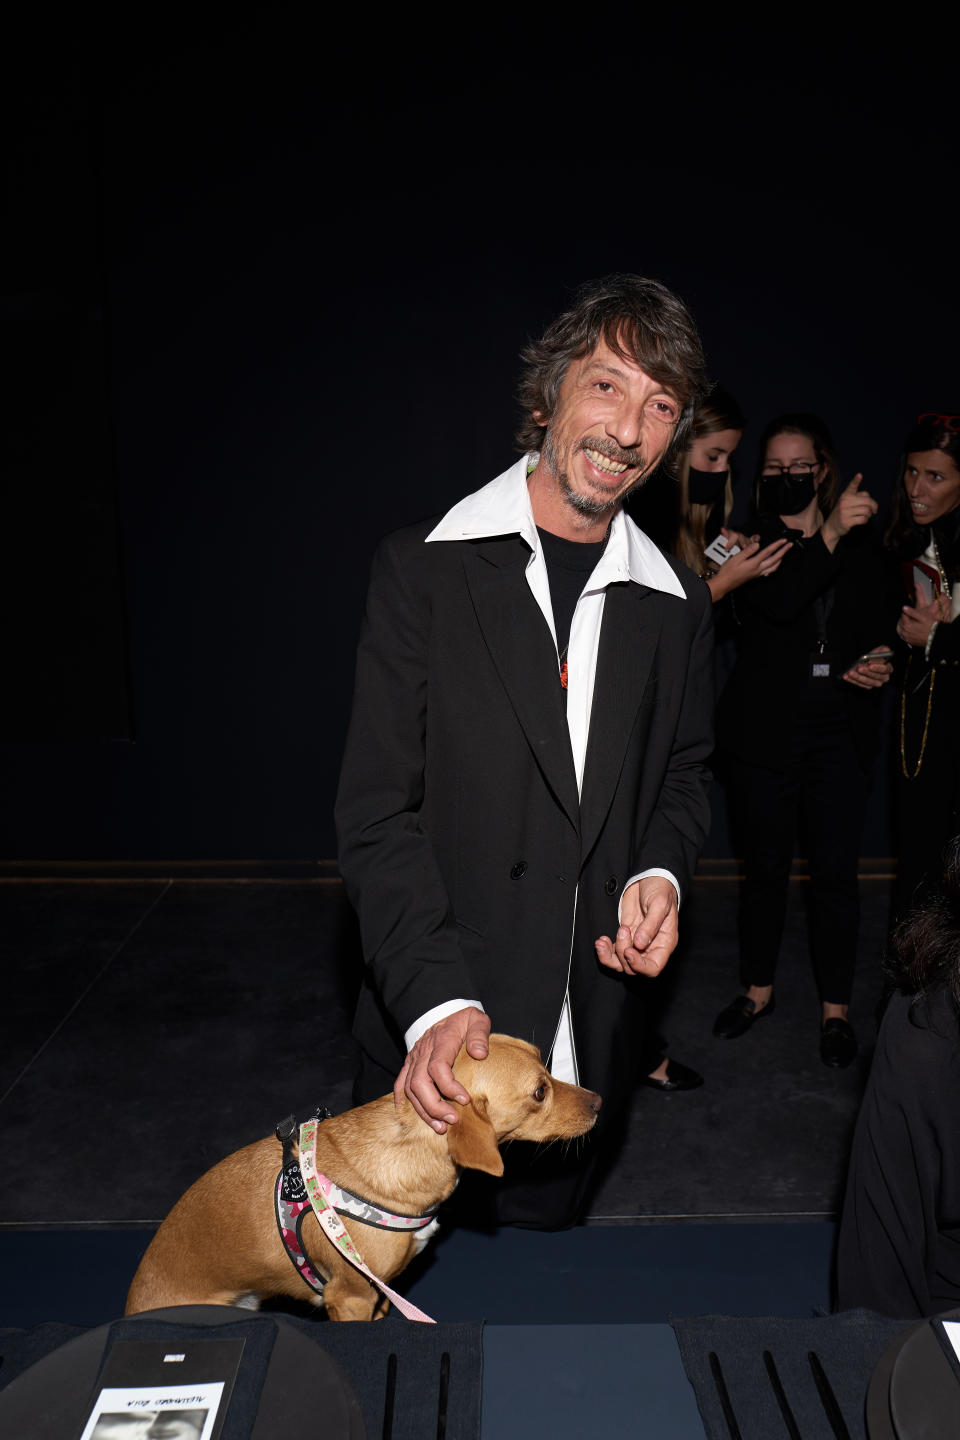 Pierpaolo Piccioli at the opening party in A Coruña for the Lindbergh exhibition. - Credit: Courtesy image